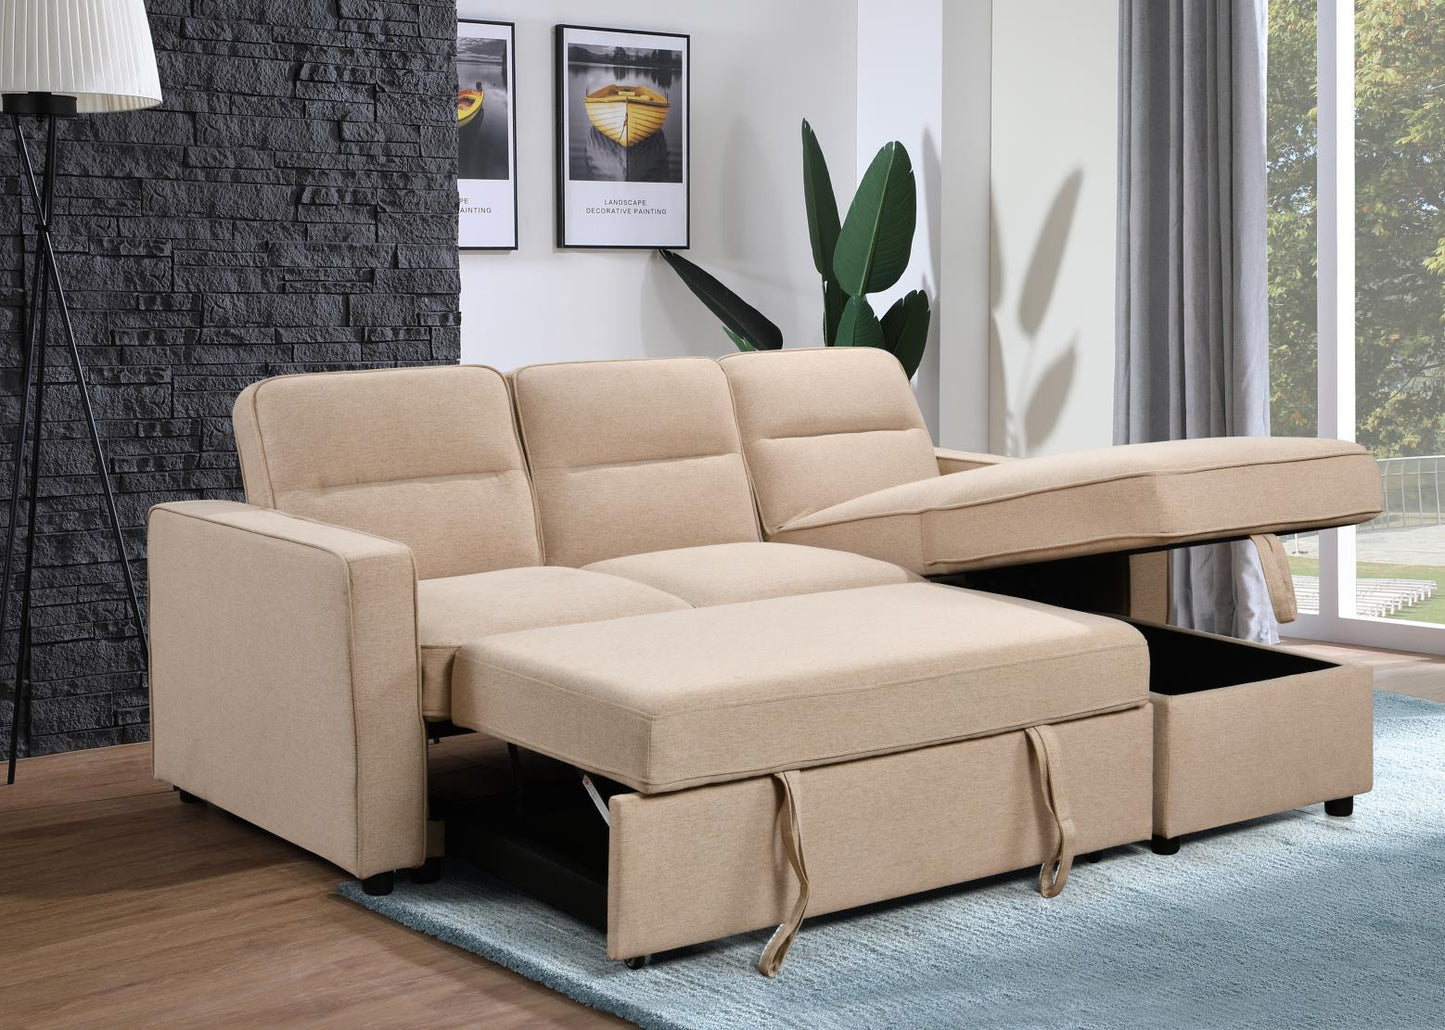 Rennie Side Reversible Sofa Bed with Storage